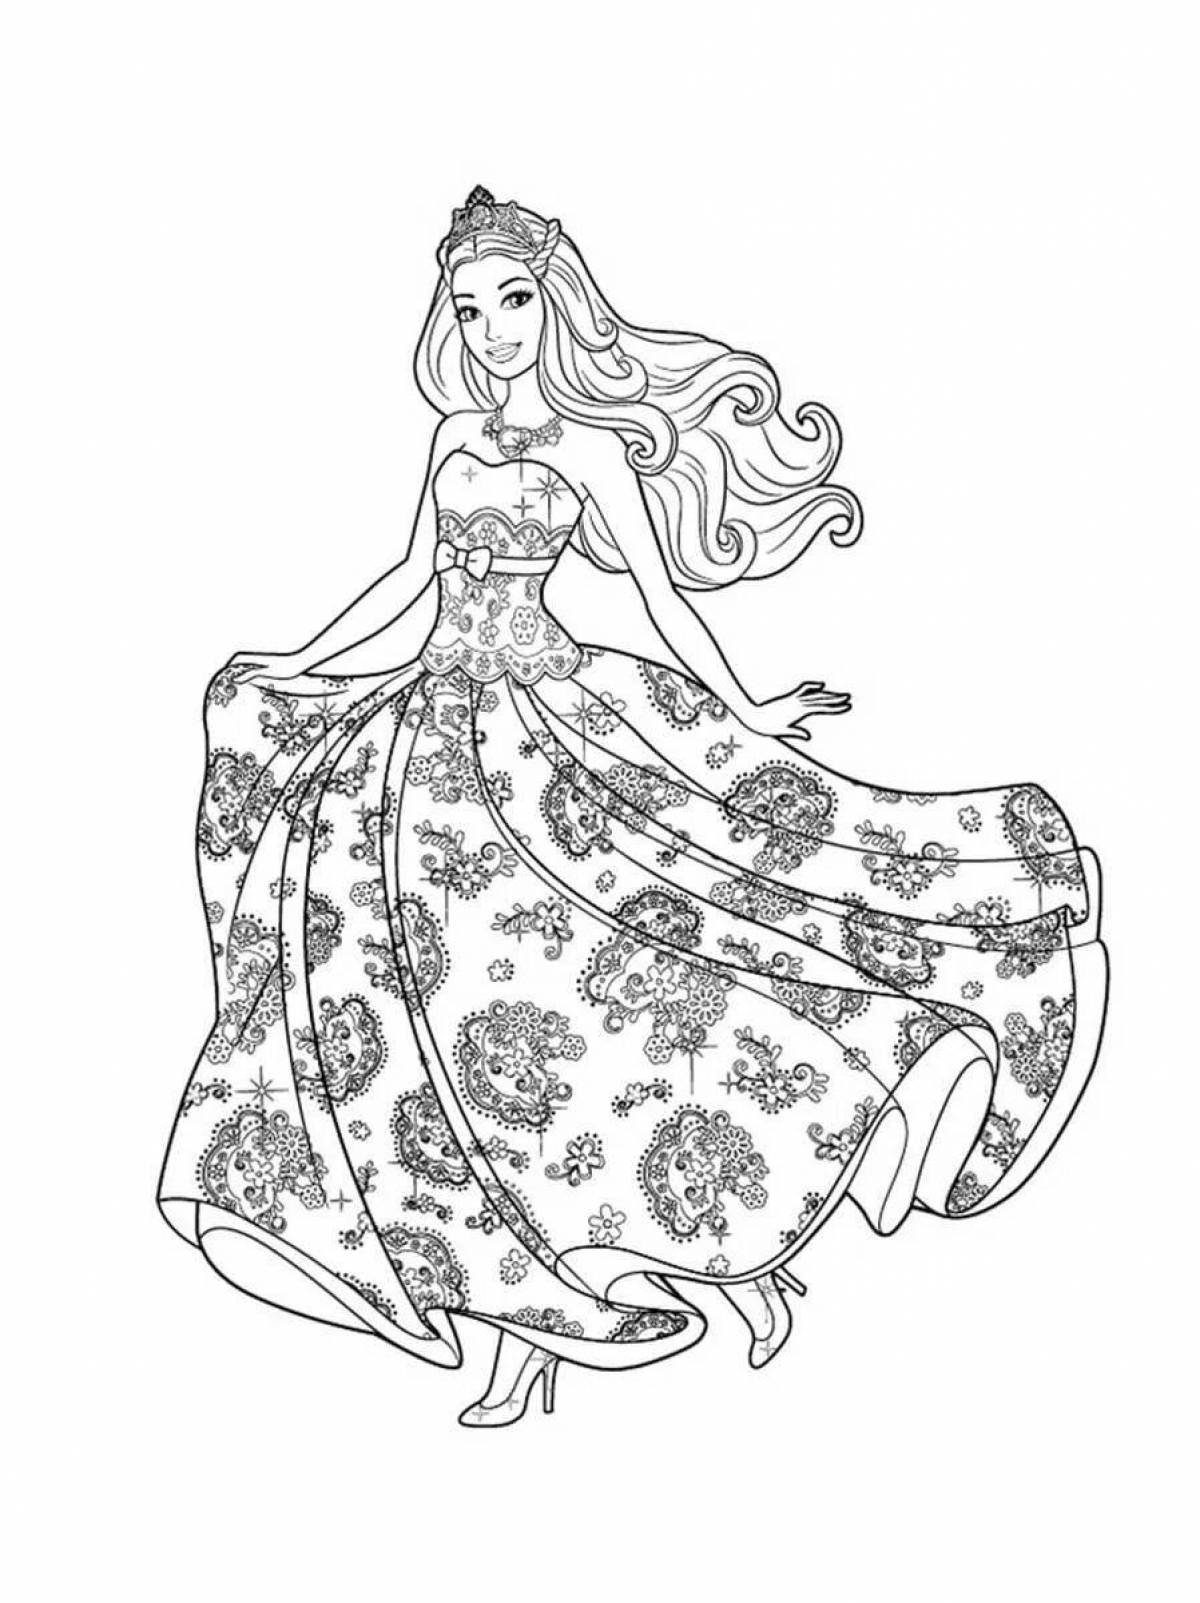 Charming princess barbie coloring book for girls